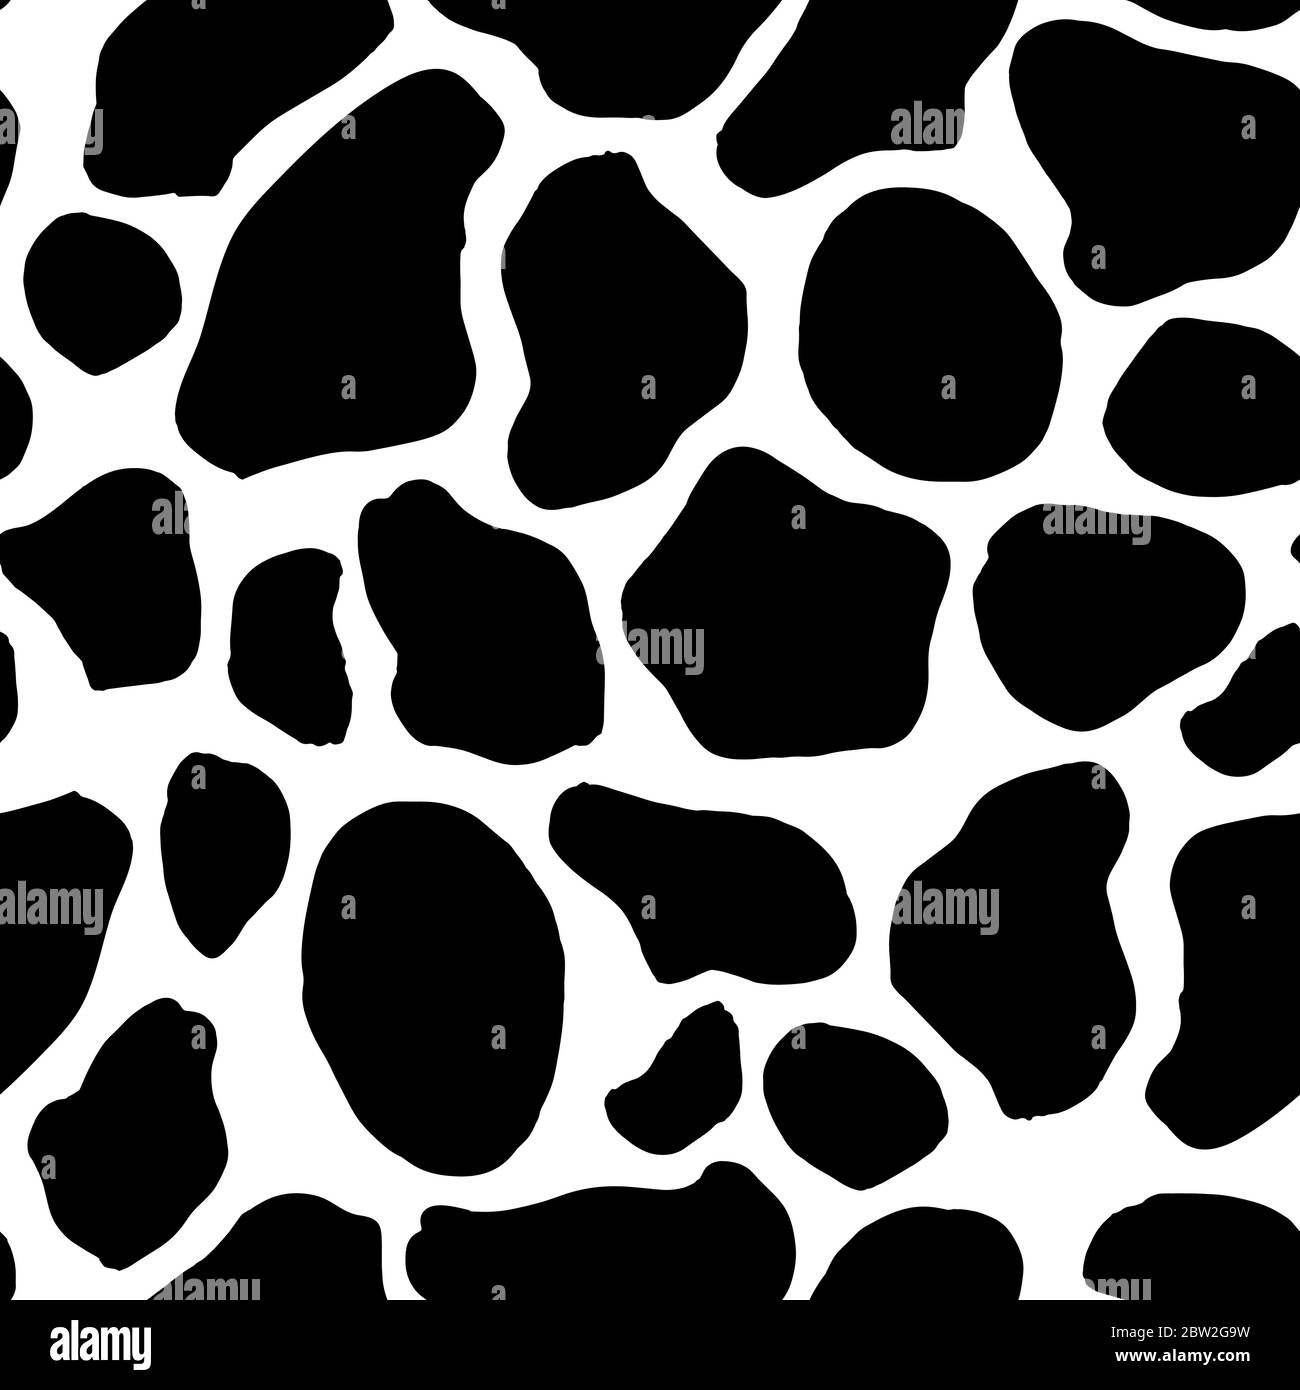 Black and White Cow pattern background, animal skin print, vector seamless design. Farm animal fur pattern with black spots background, modern decoration Stock Vector